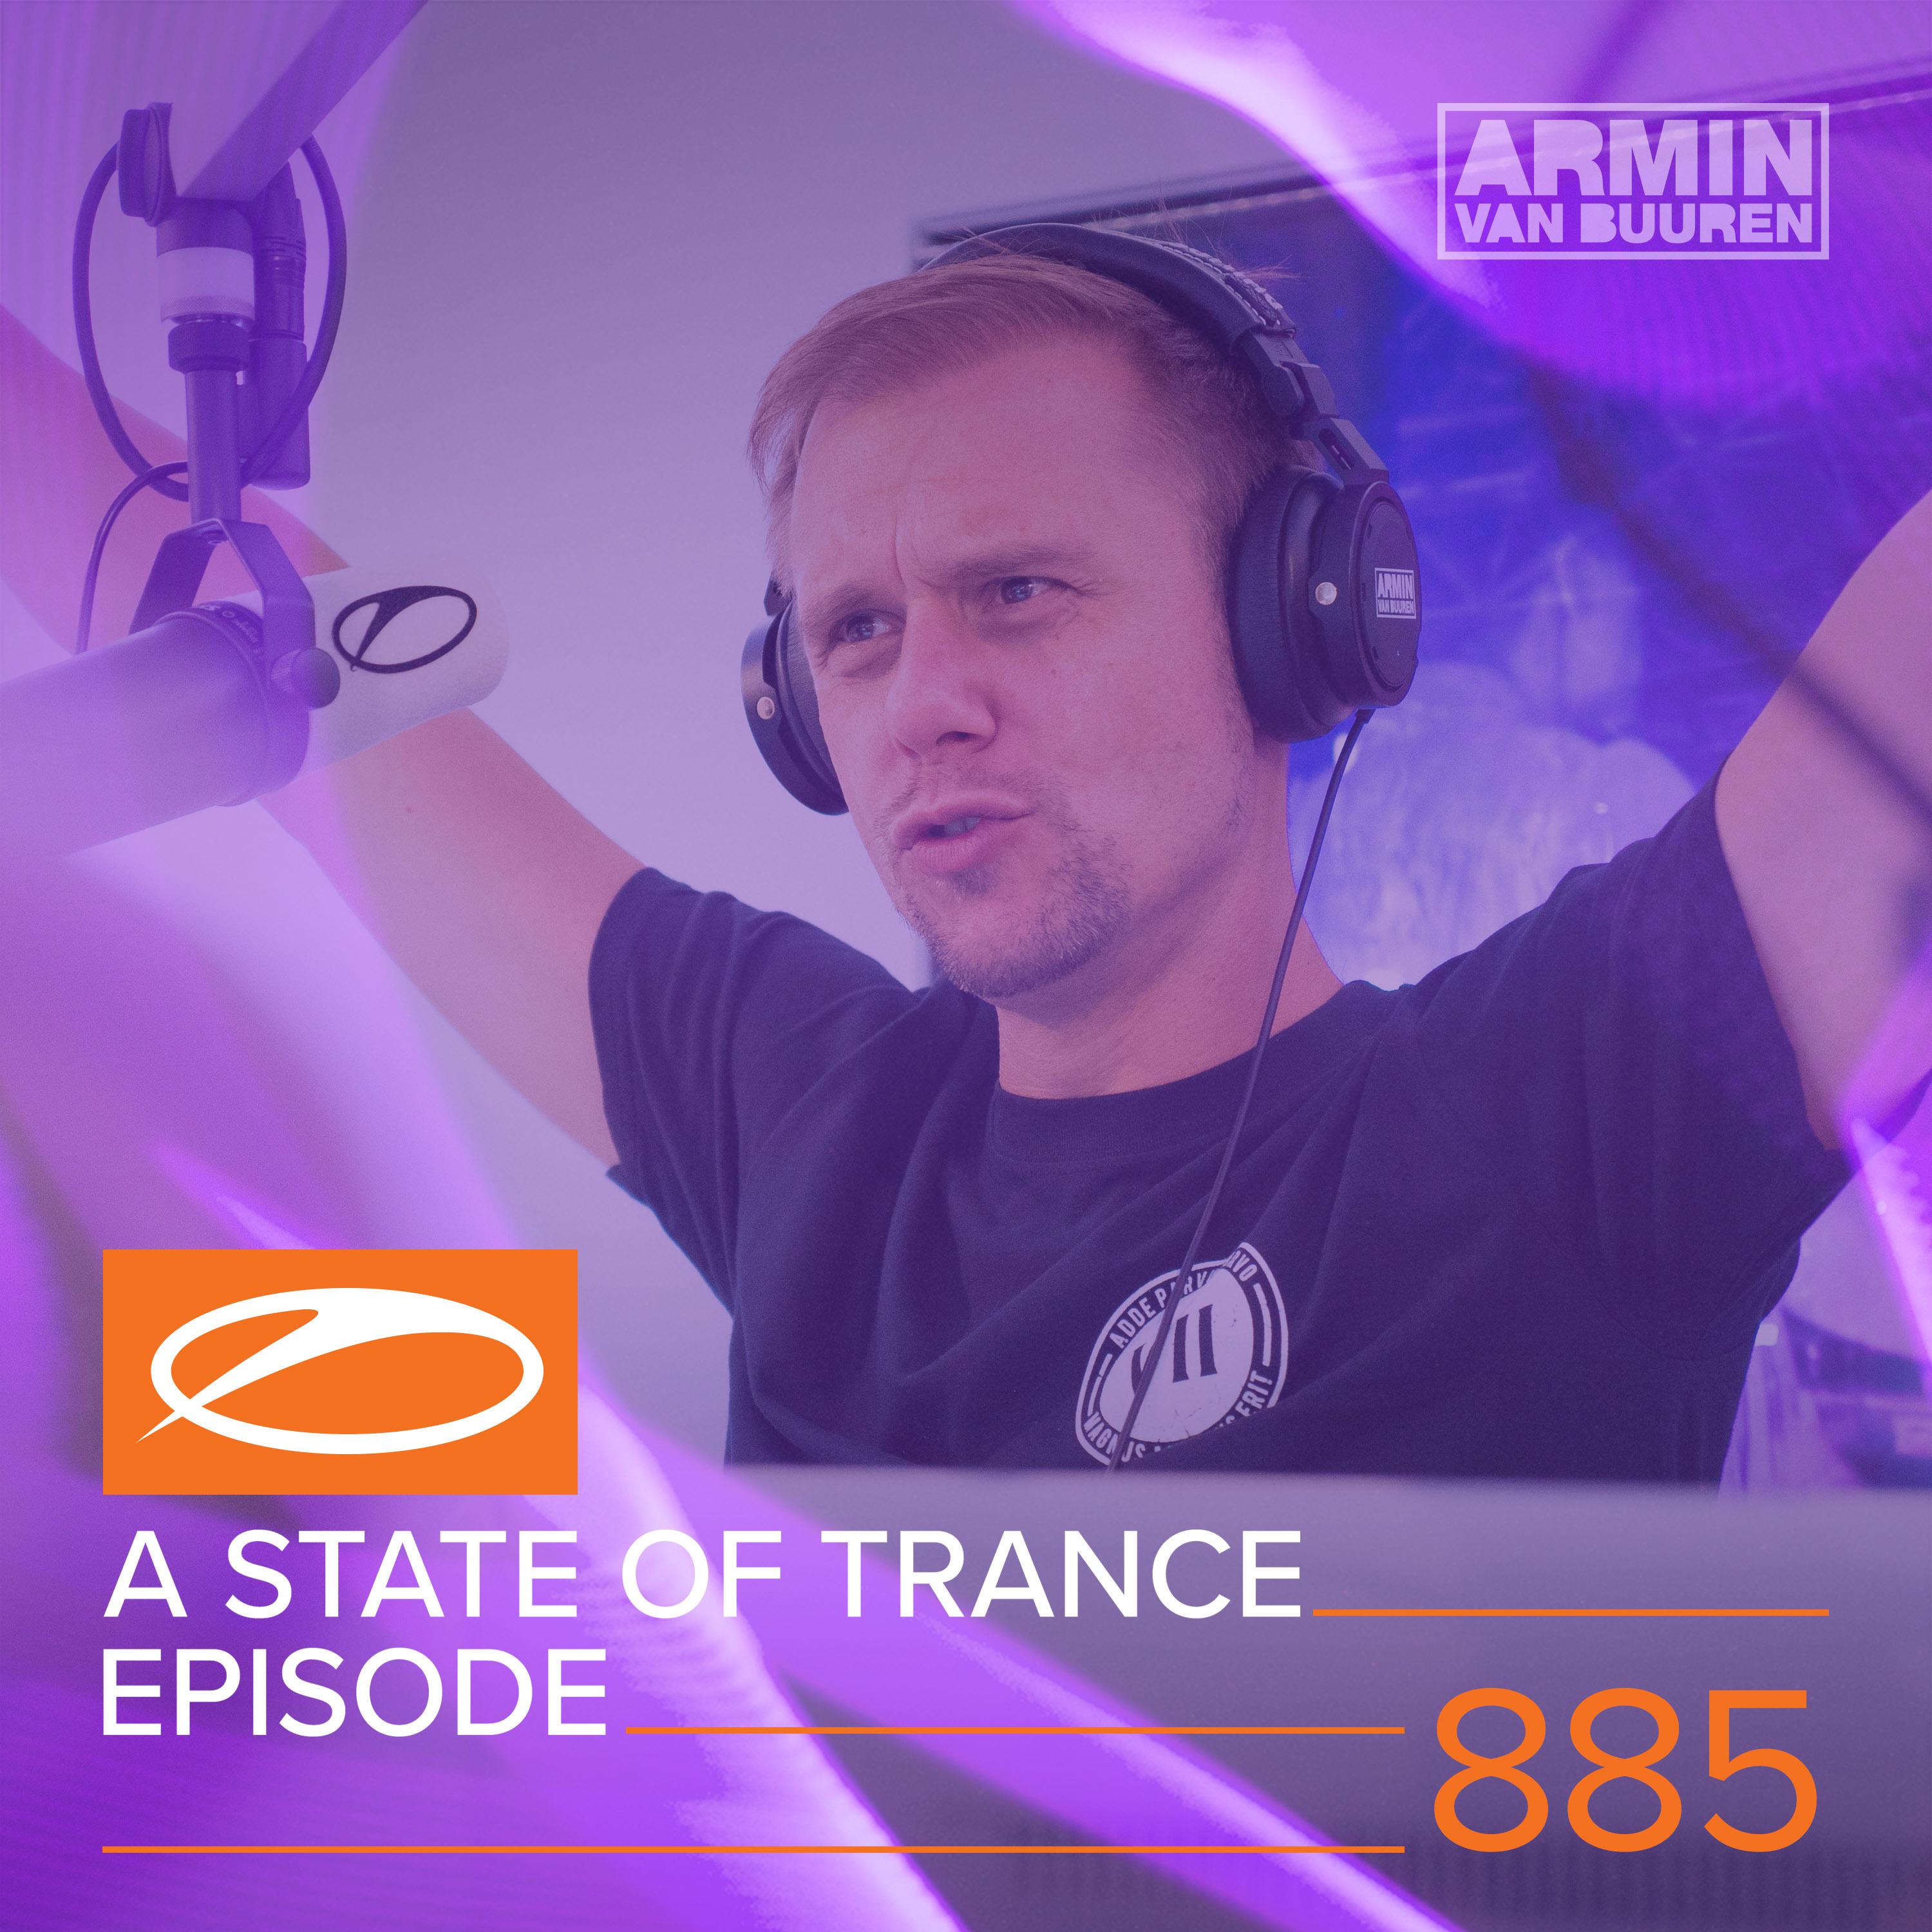 A State Of Trance (ASOT 885) (Track Recap, Pt. 5)